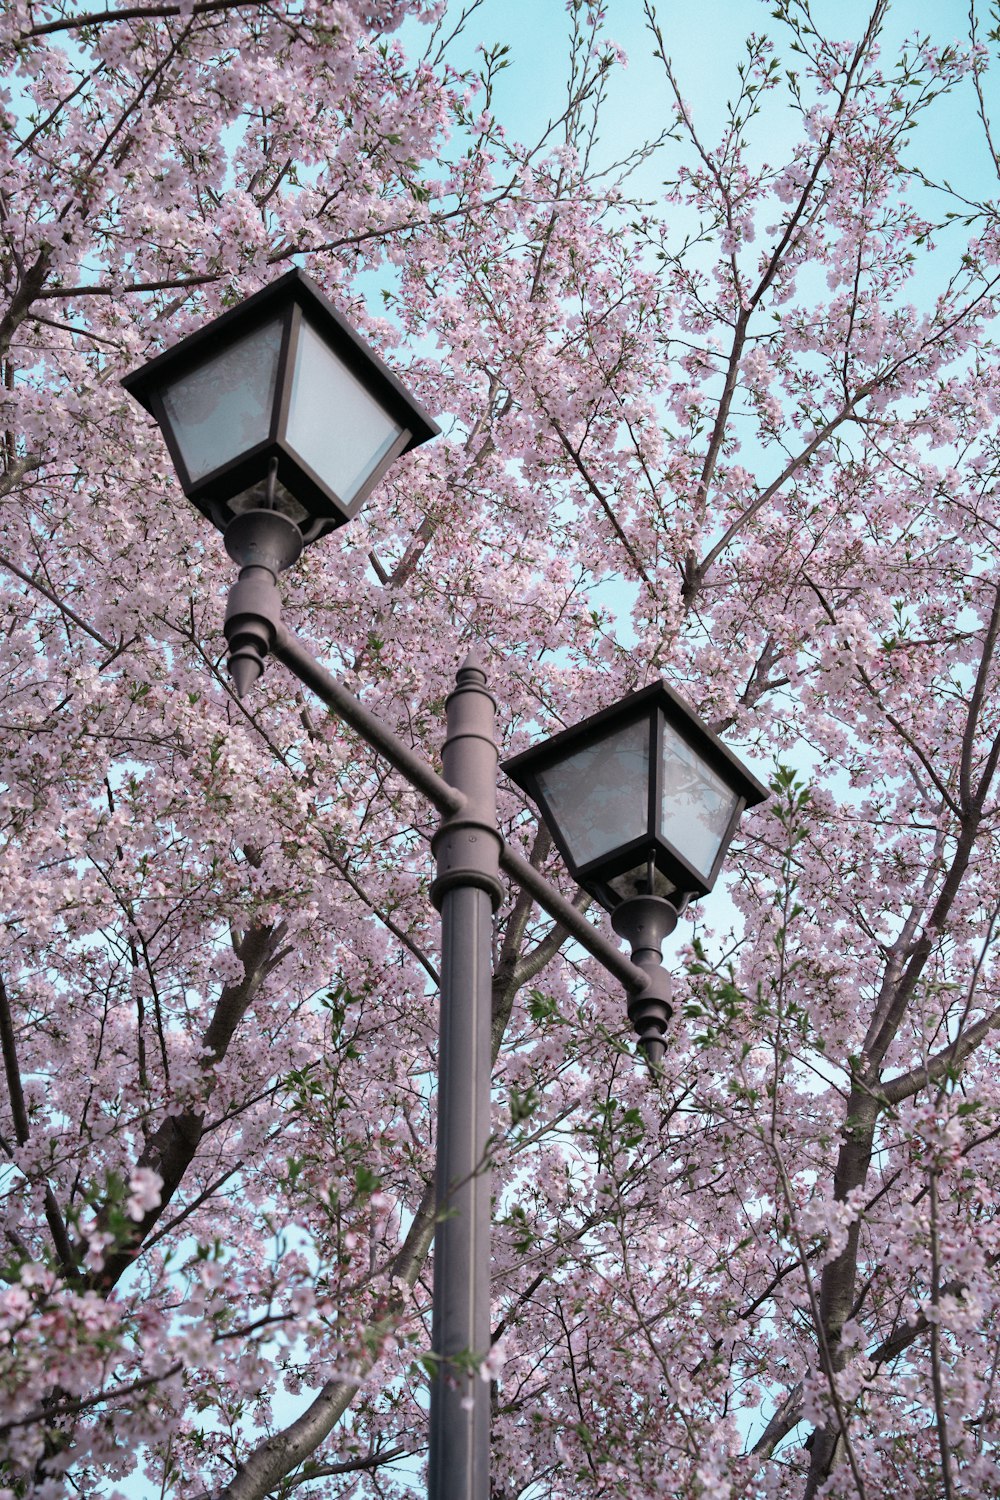 a lamp post with two street lights and a flowering tree in the background